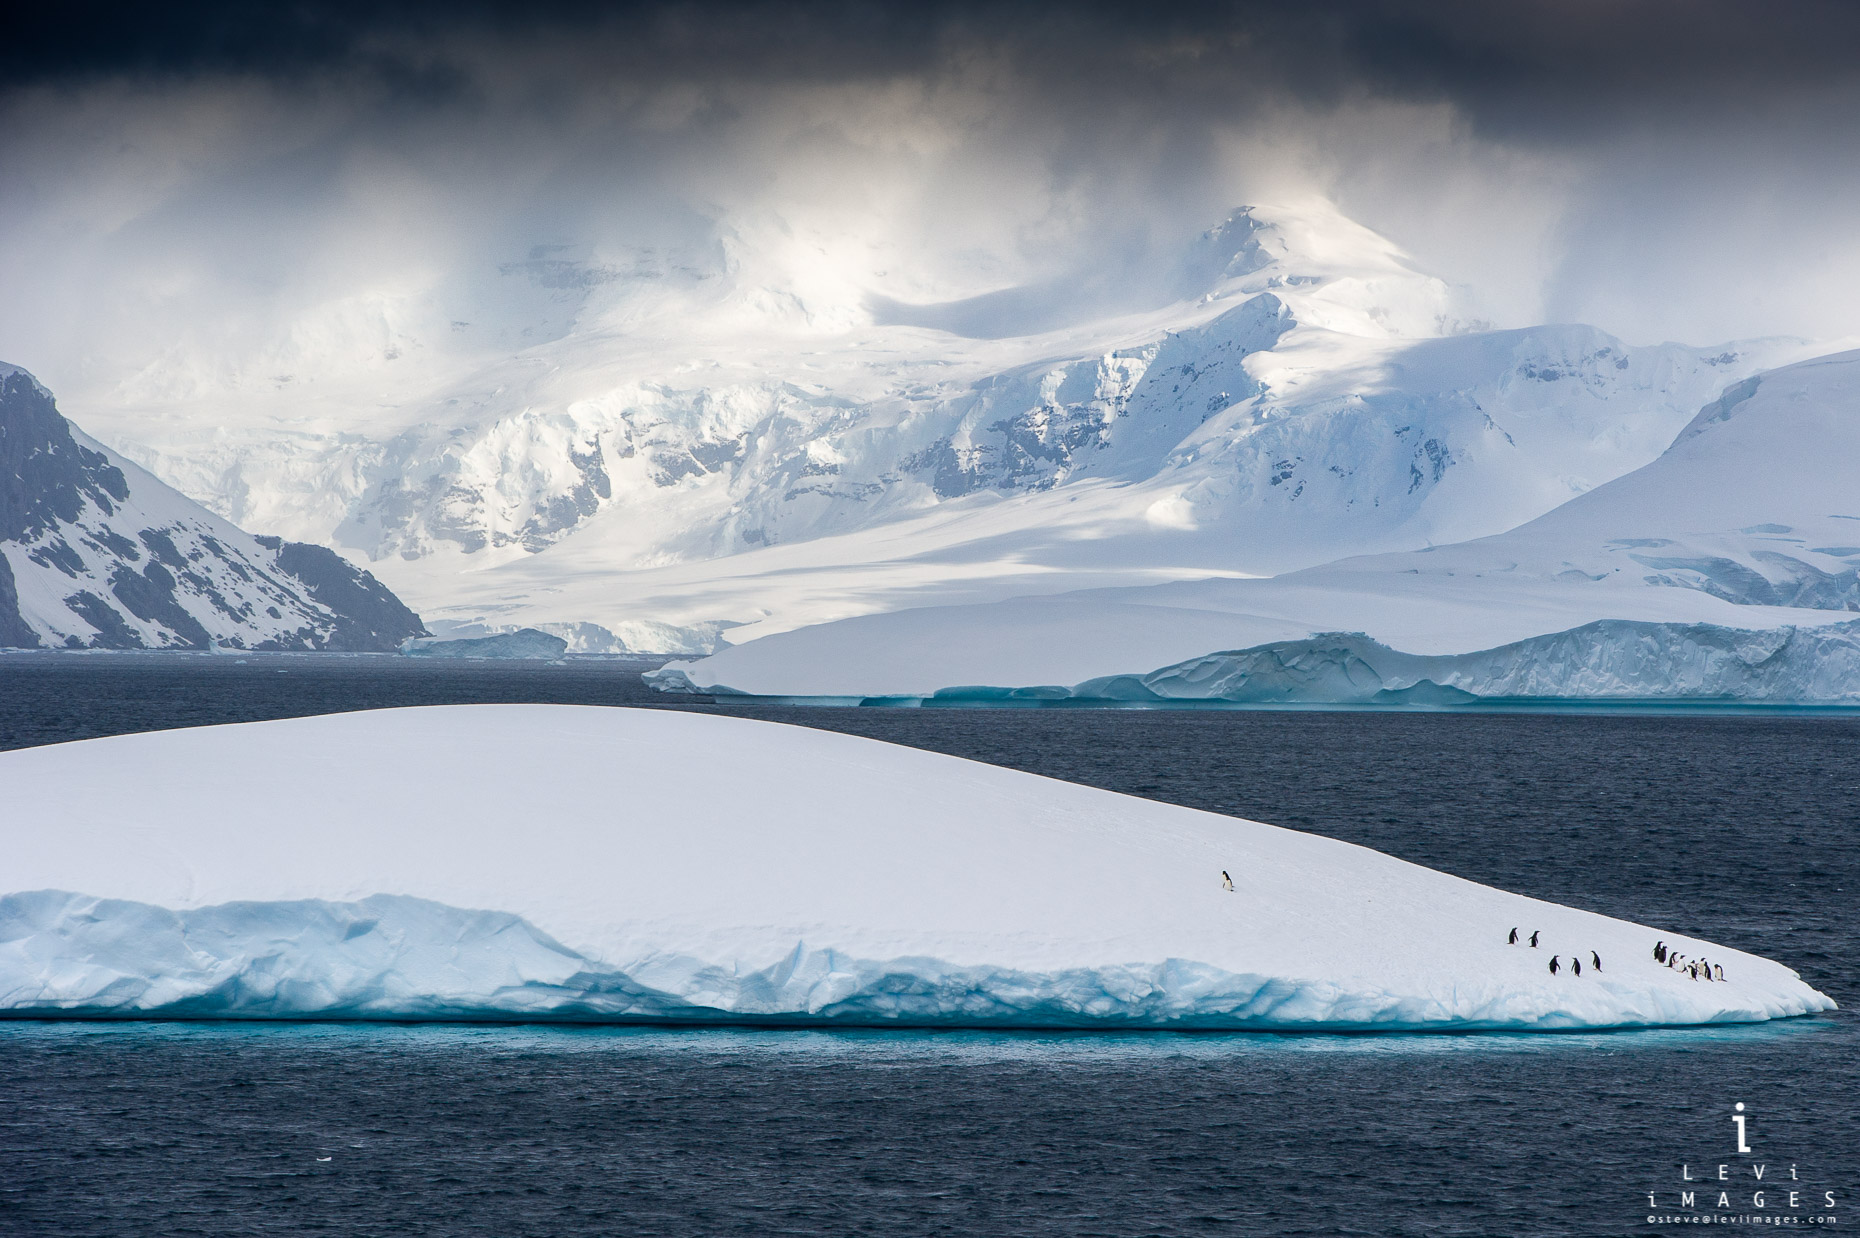 Penguins, mountains and iceberg reflection in low cloud cover, Paulette Island Antarctica